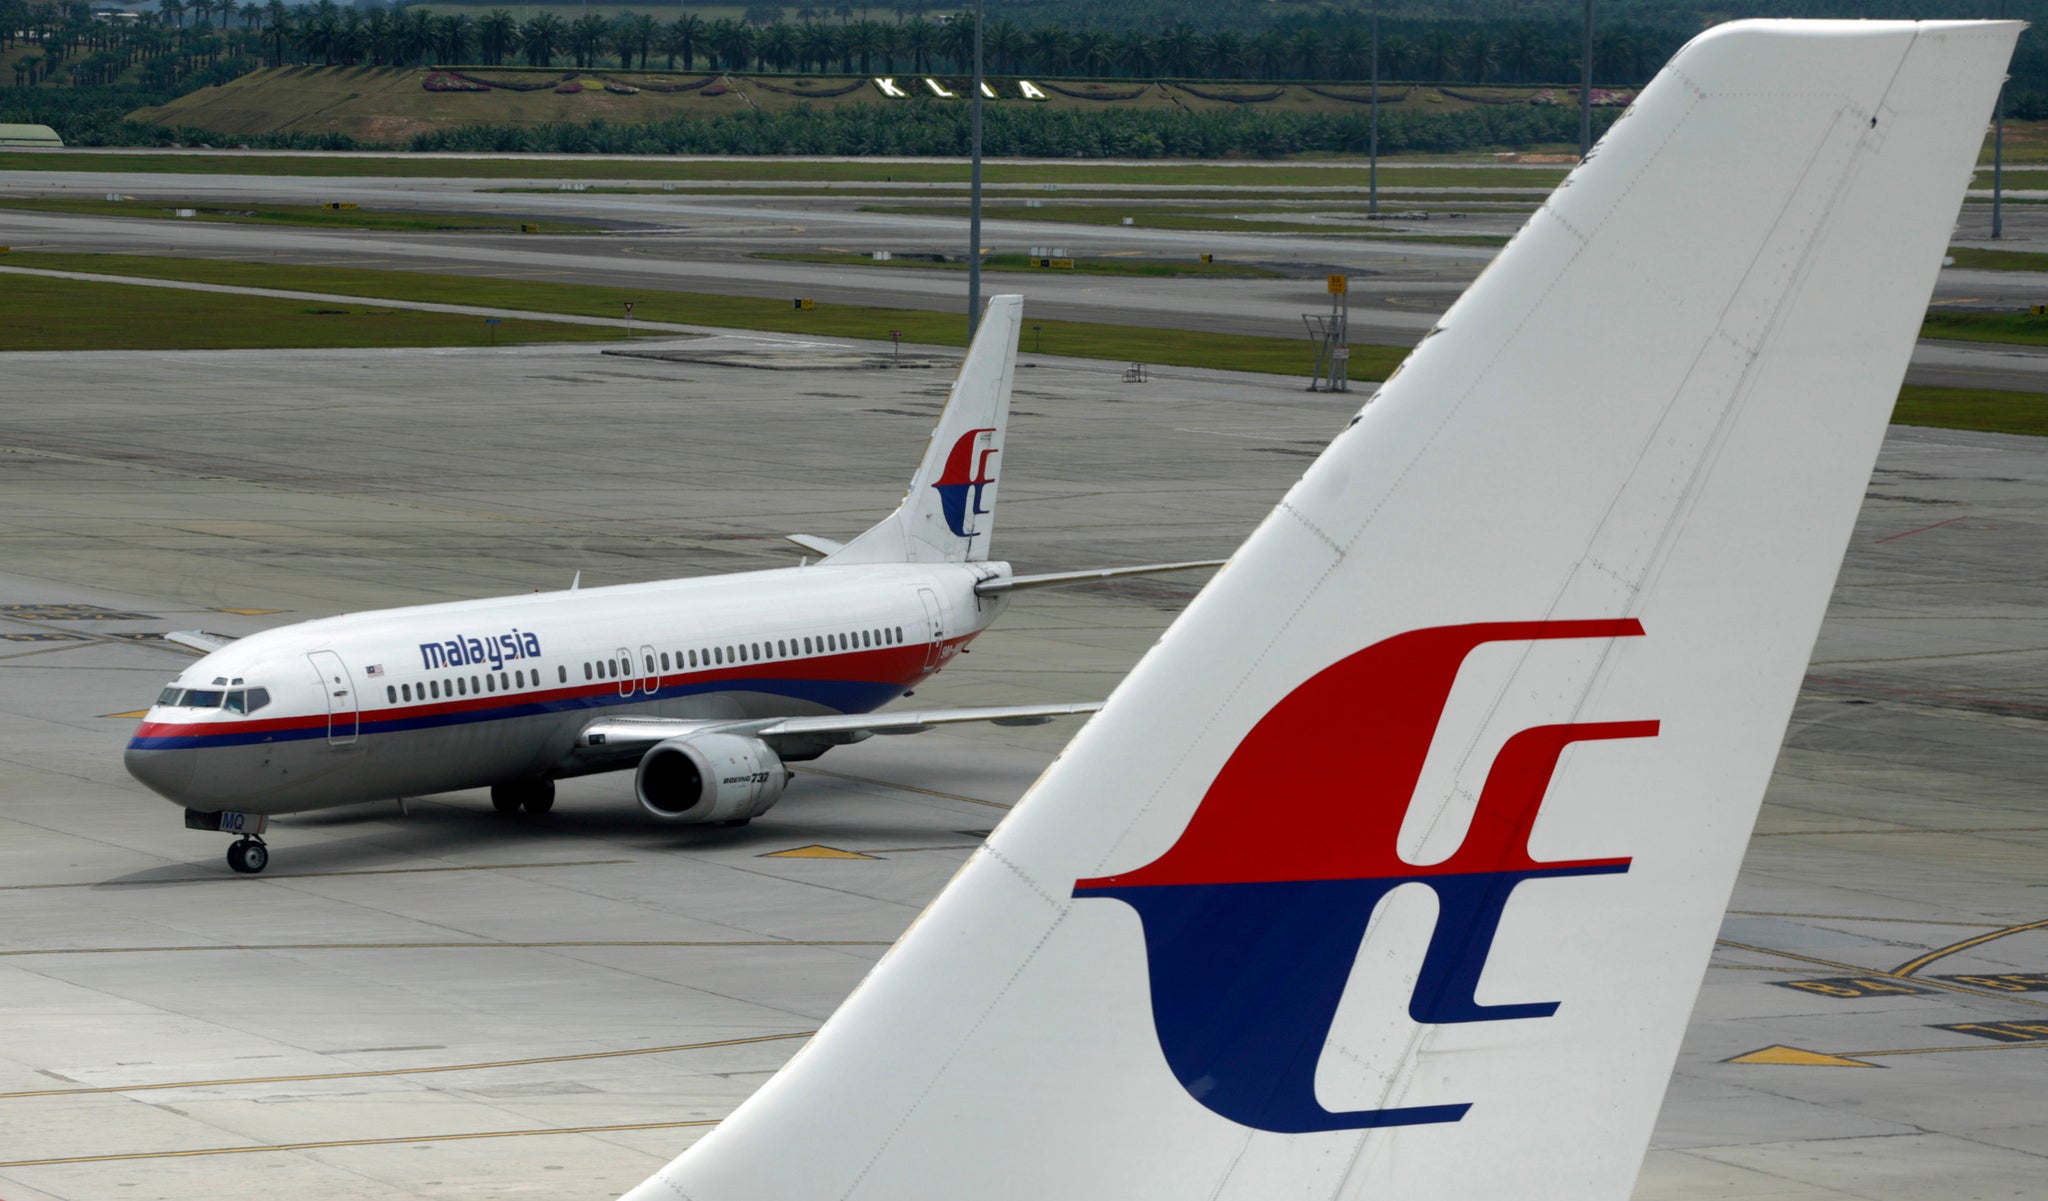 Pictures of empty cabins on board Malaysia Airlines flights have surfaced on social media as the carrier continues to operate flights